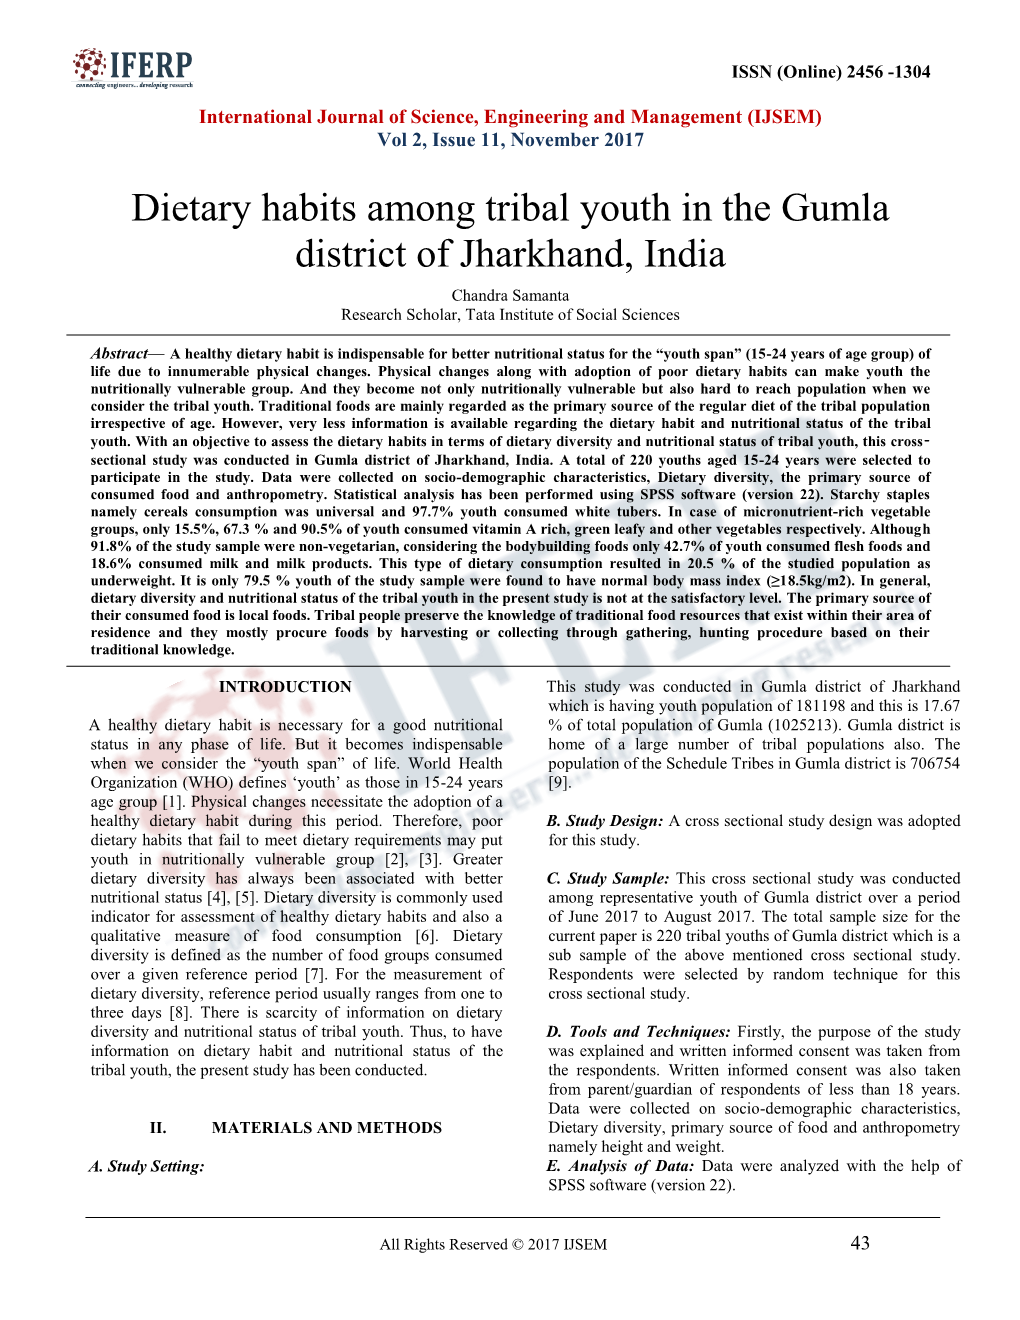 Dietary Habits Among Tribal Youth in the Gumla District of Jharkhand, India Chandra Samanta Research Scholar, Tata Institute of Social Sciences